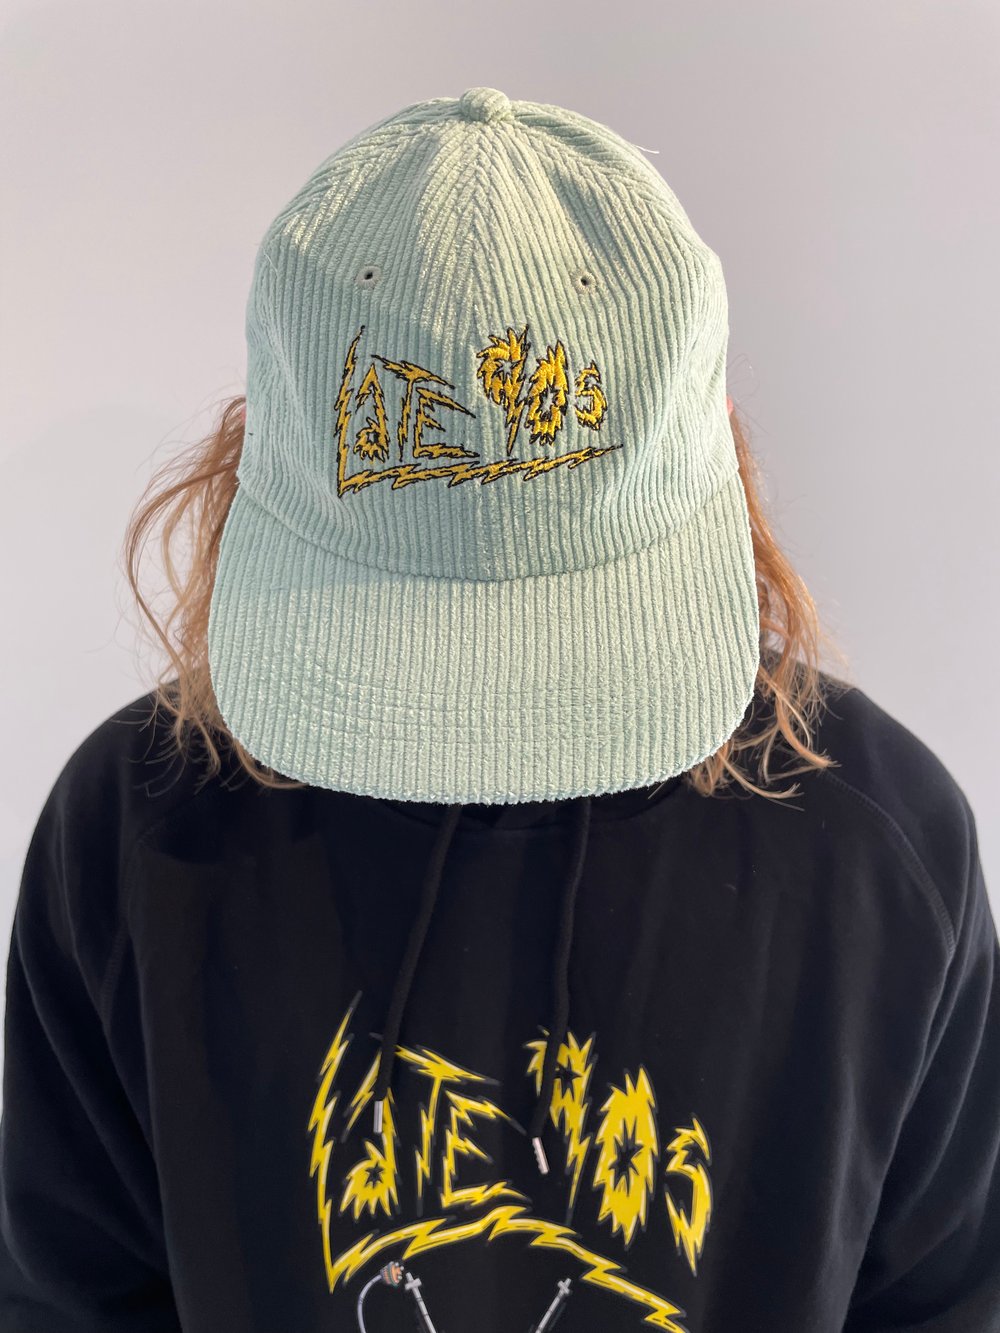 LATE 90s Cord Hat